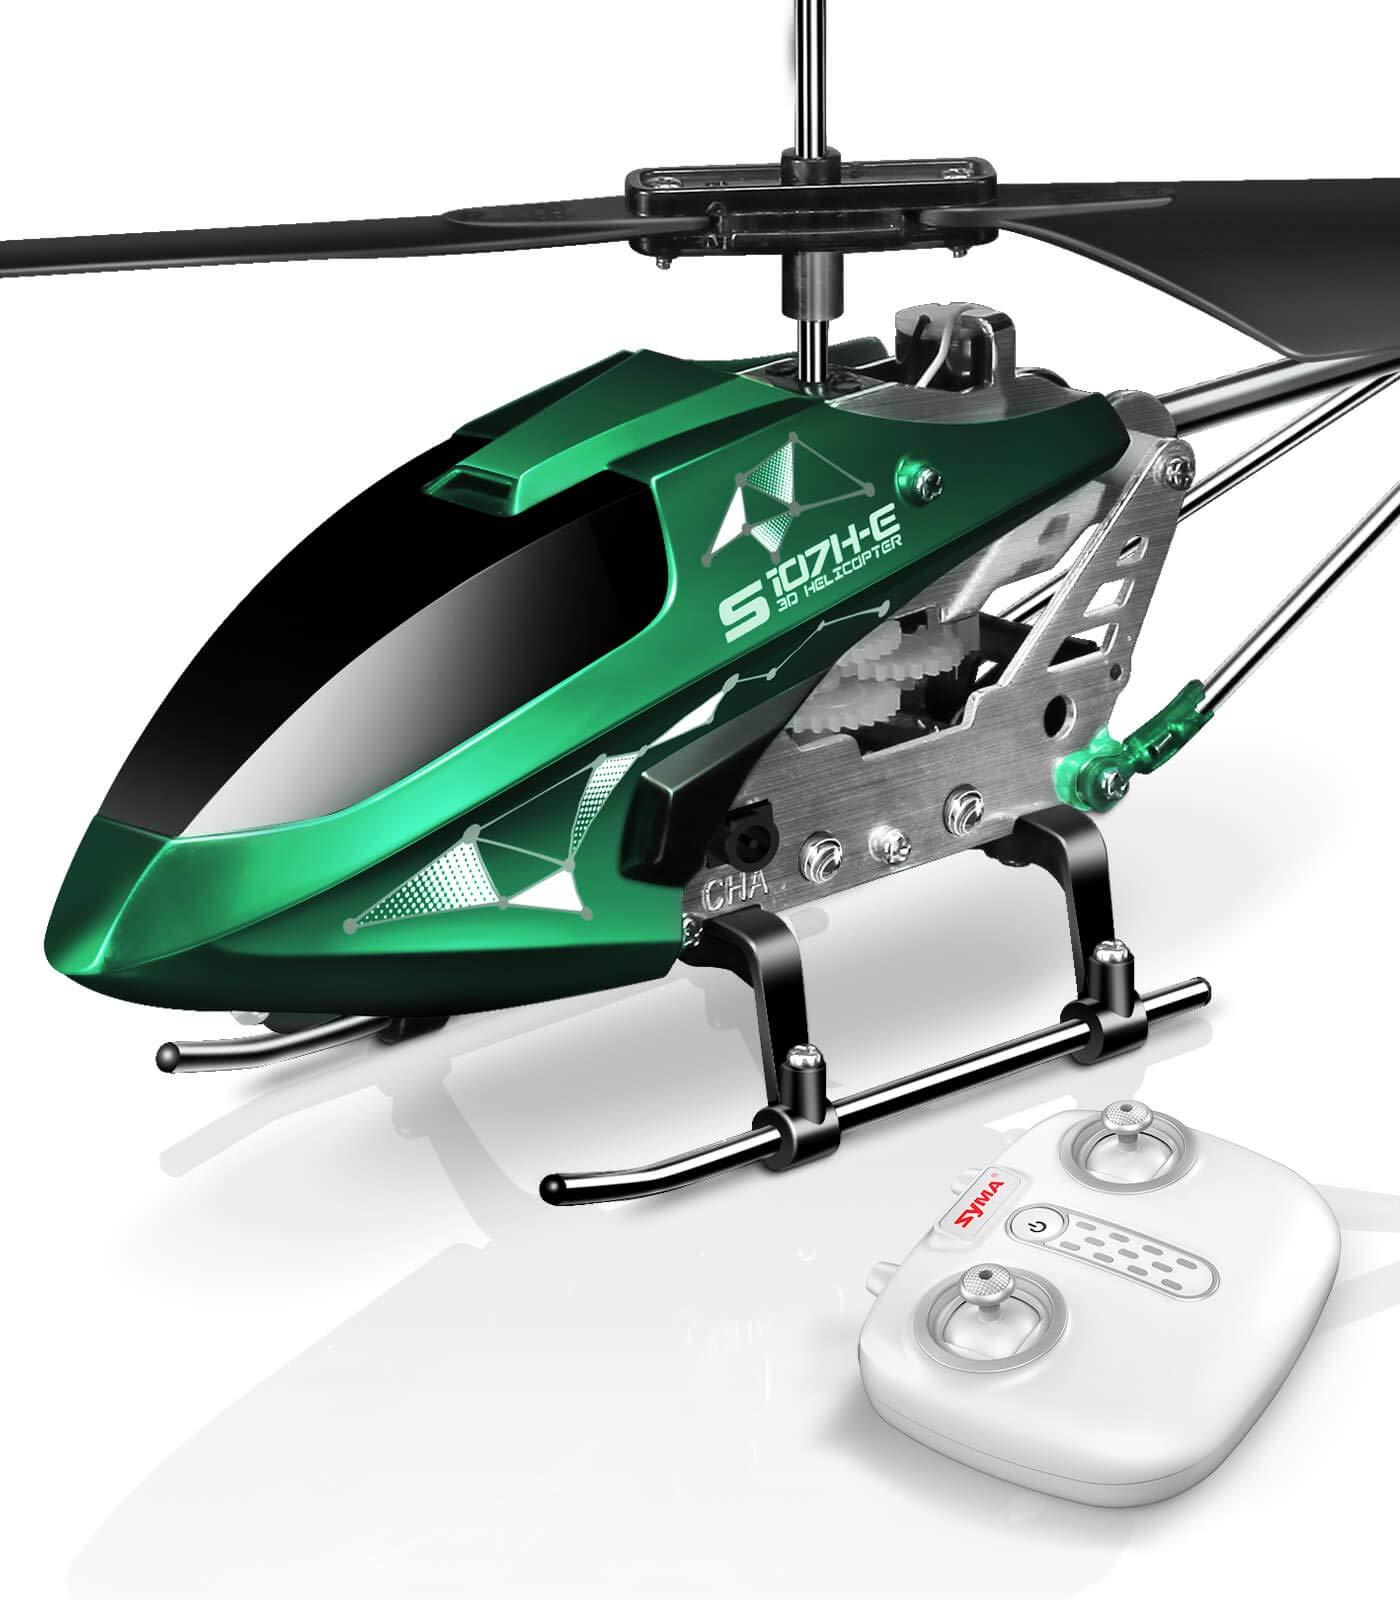 S032G Helicopter:  Protective frame, auto-stop, low battery warning, recommended age: 14+.